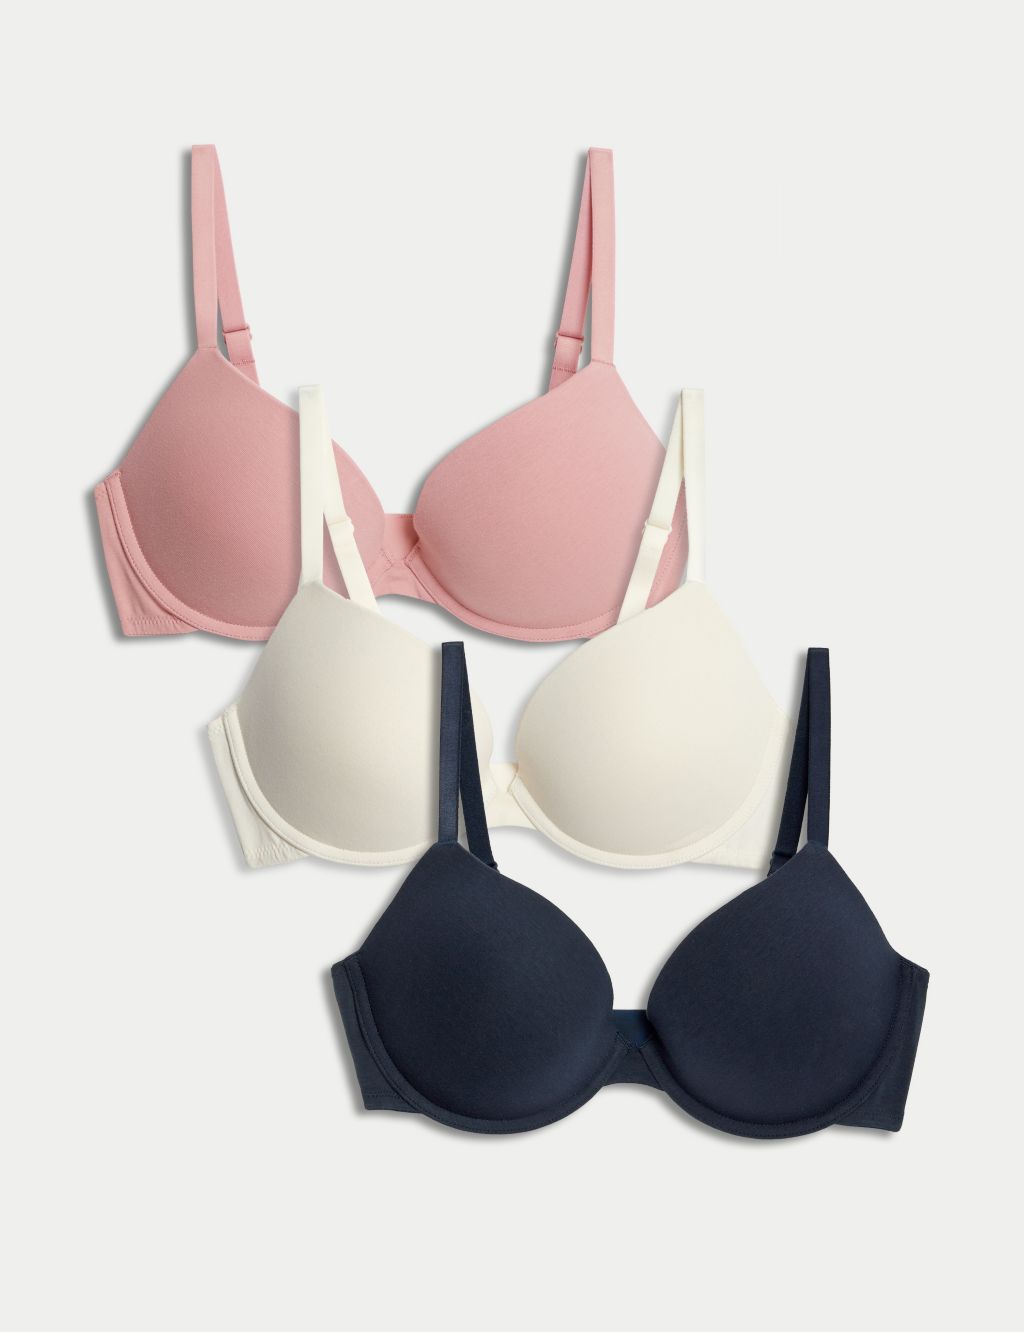 NEW! M&S Marks & Spencer 30B 30D 2 pack blue-mix/navy non-wired t-shirt bras  - SurMedios